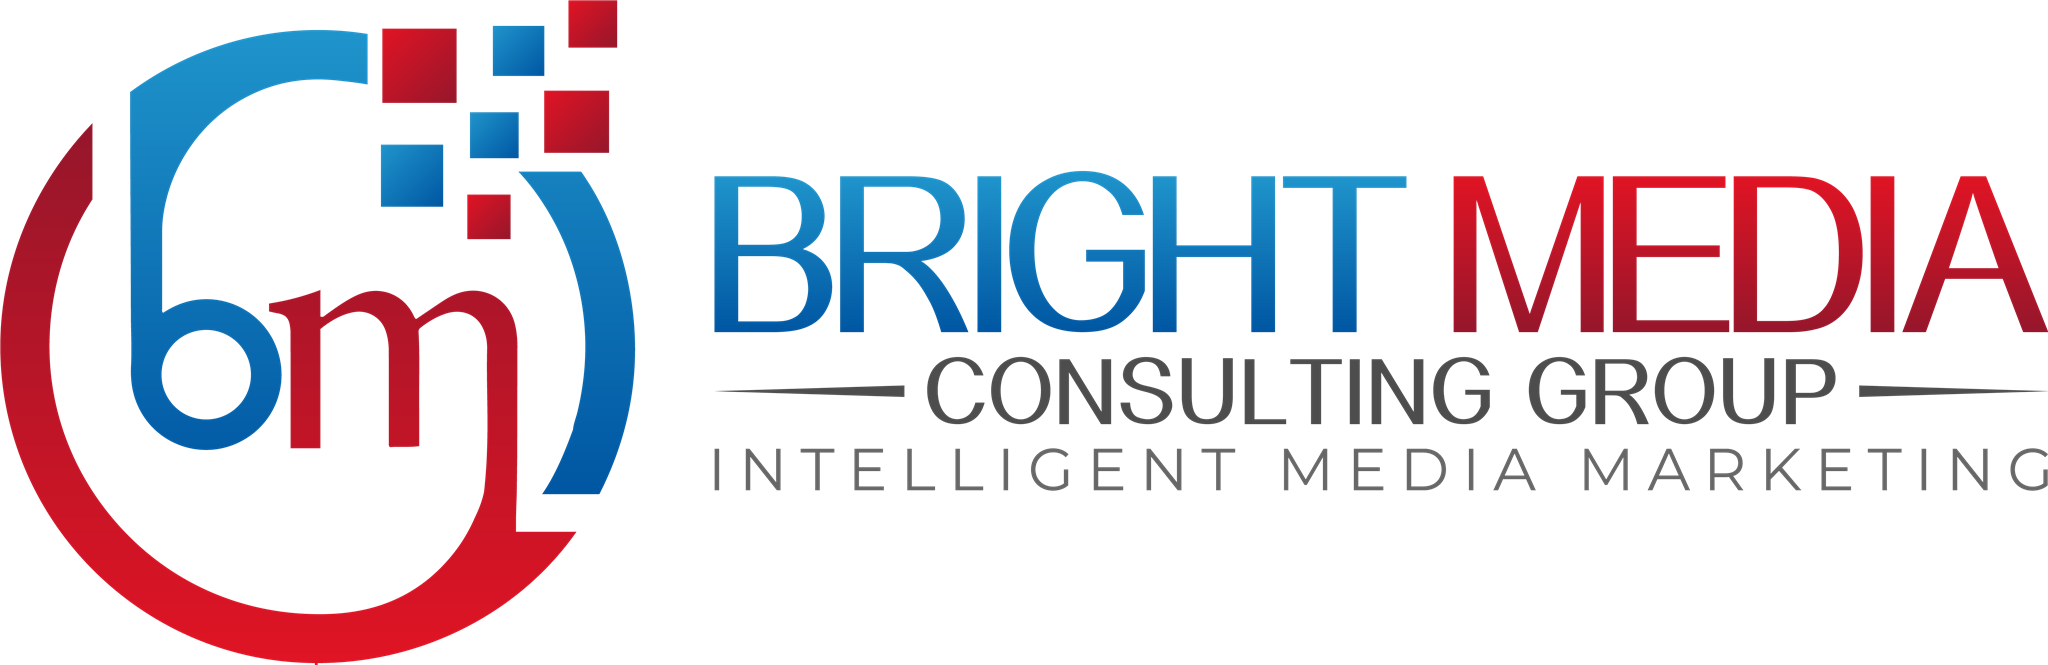 Bright Media Consulting Group